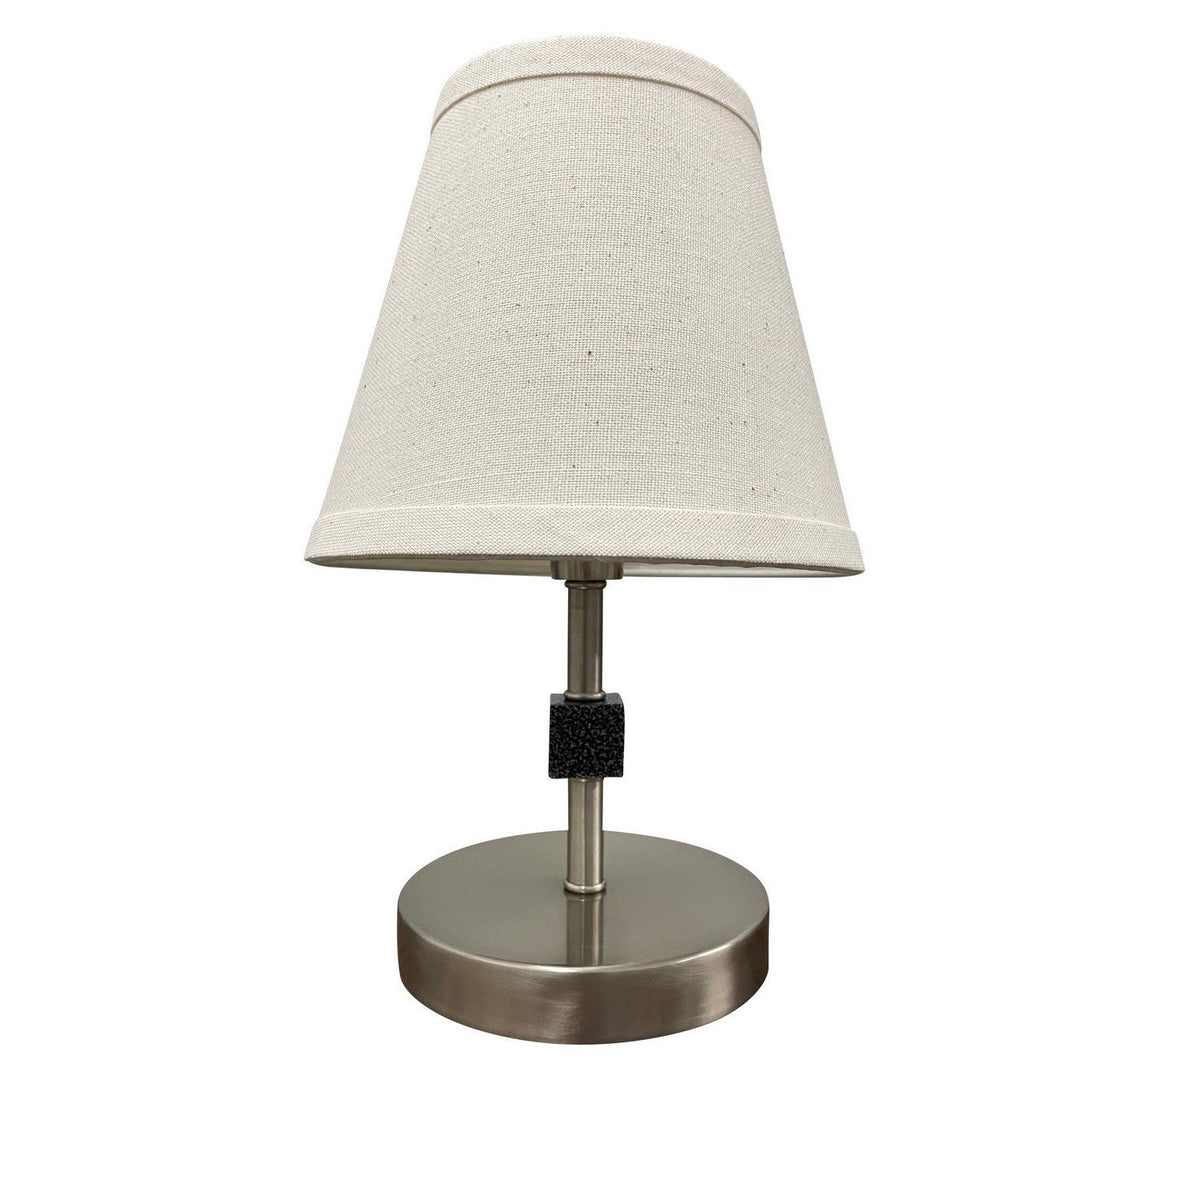 House of Troy - B203-SN/SS - One Light Accent Lamp - Bryson - Satin Nickel/Supreme Silver